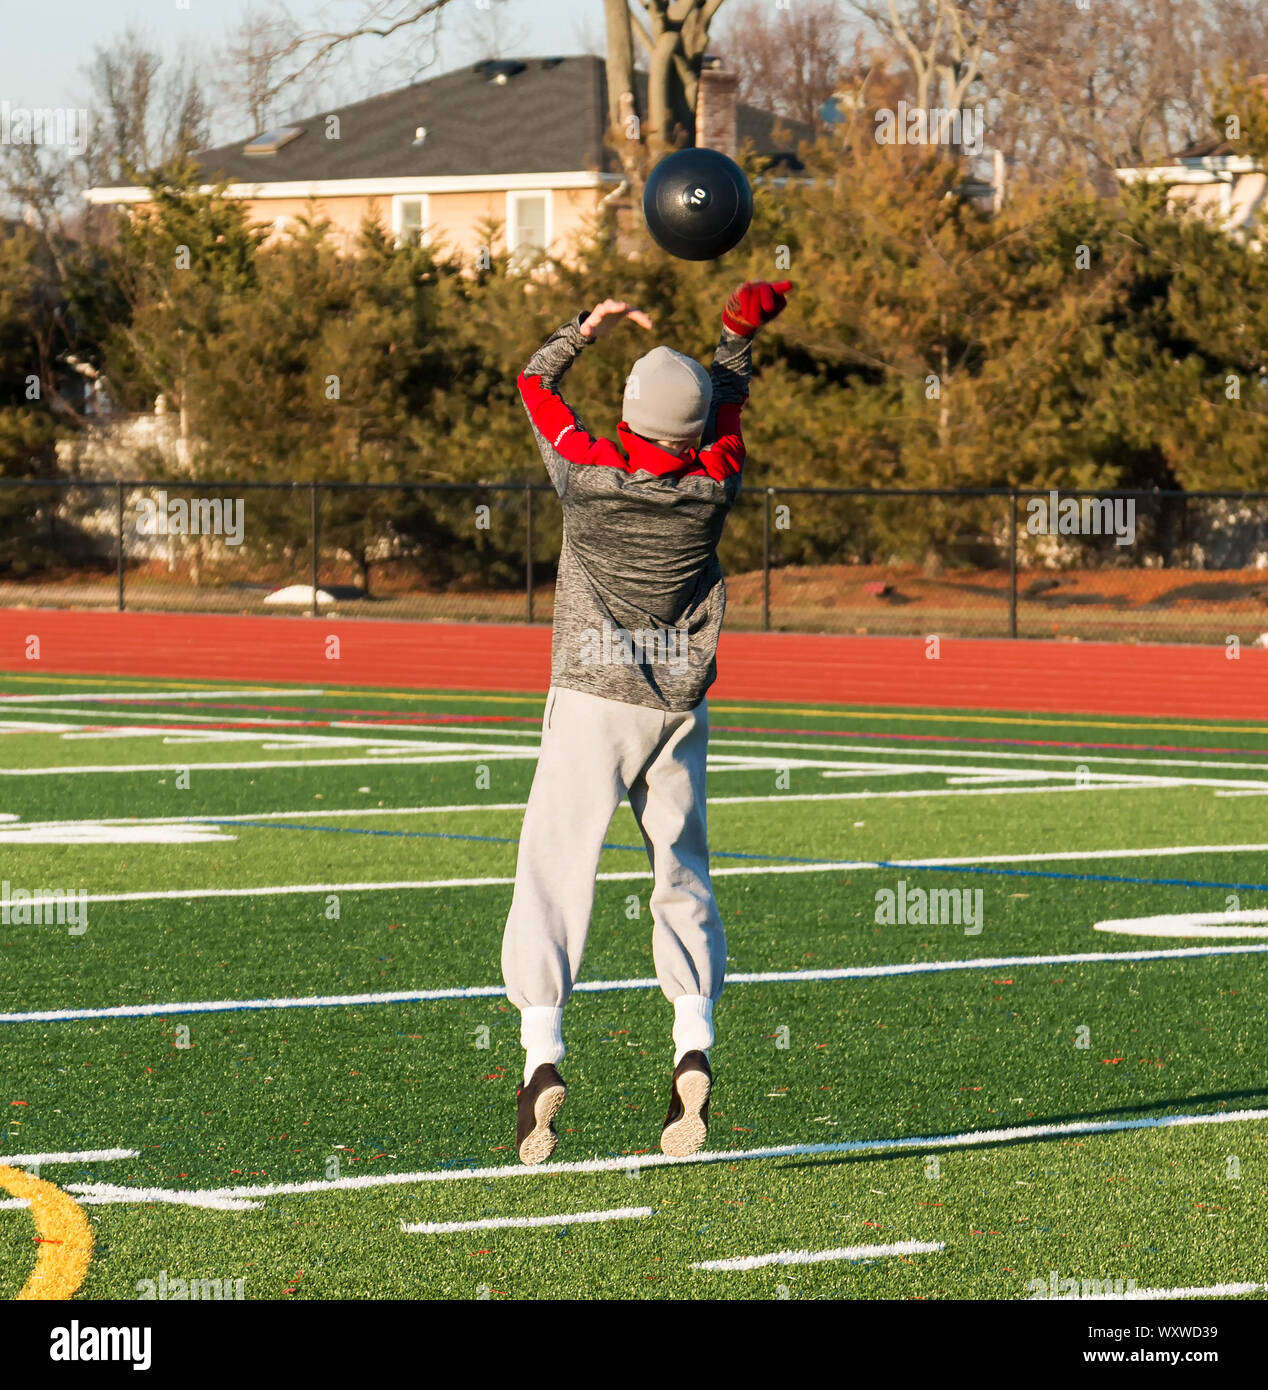 A high school track and field athlete is training for strength and speed by throwing a 10 pound medicine ball over his head while jumping outside on a Stock Photo